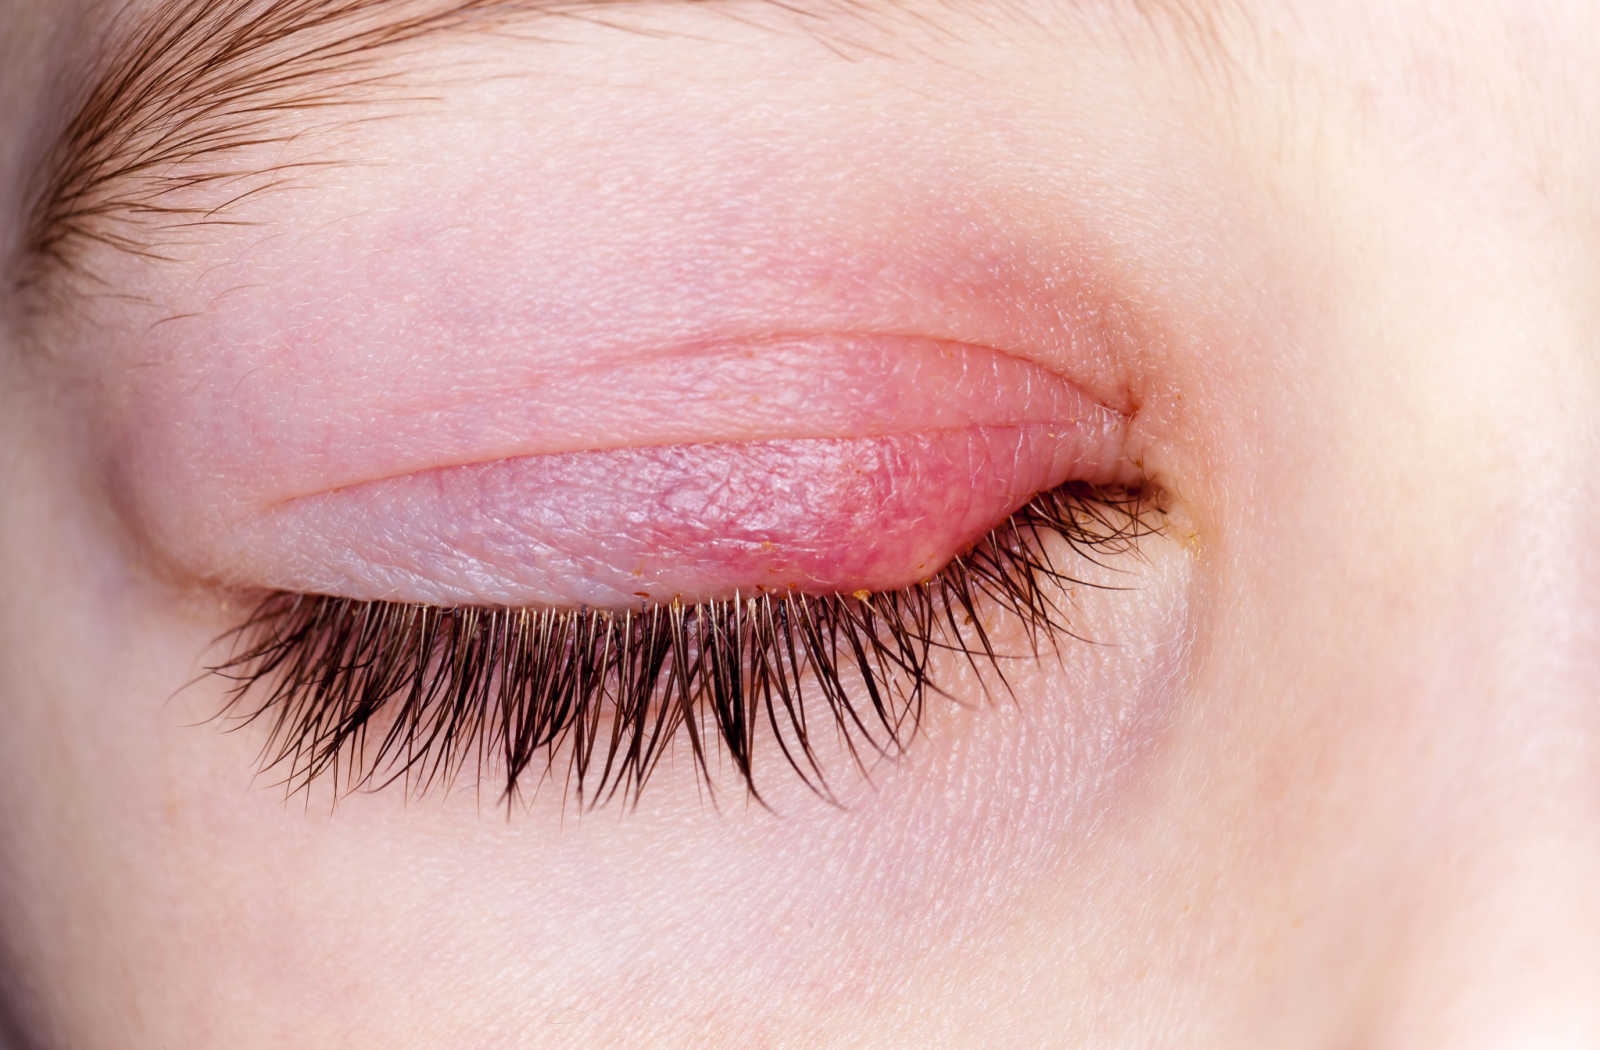 Up close image of a patient's closed eye with stye on the upper eyelid.